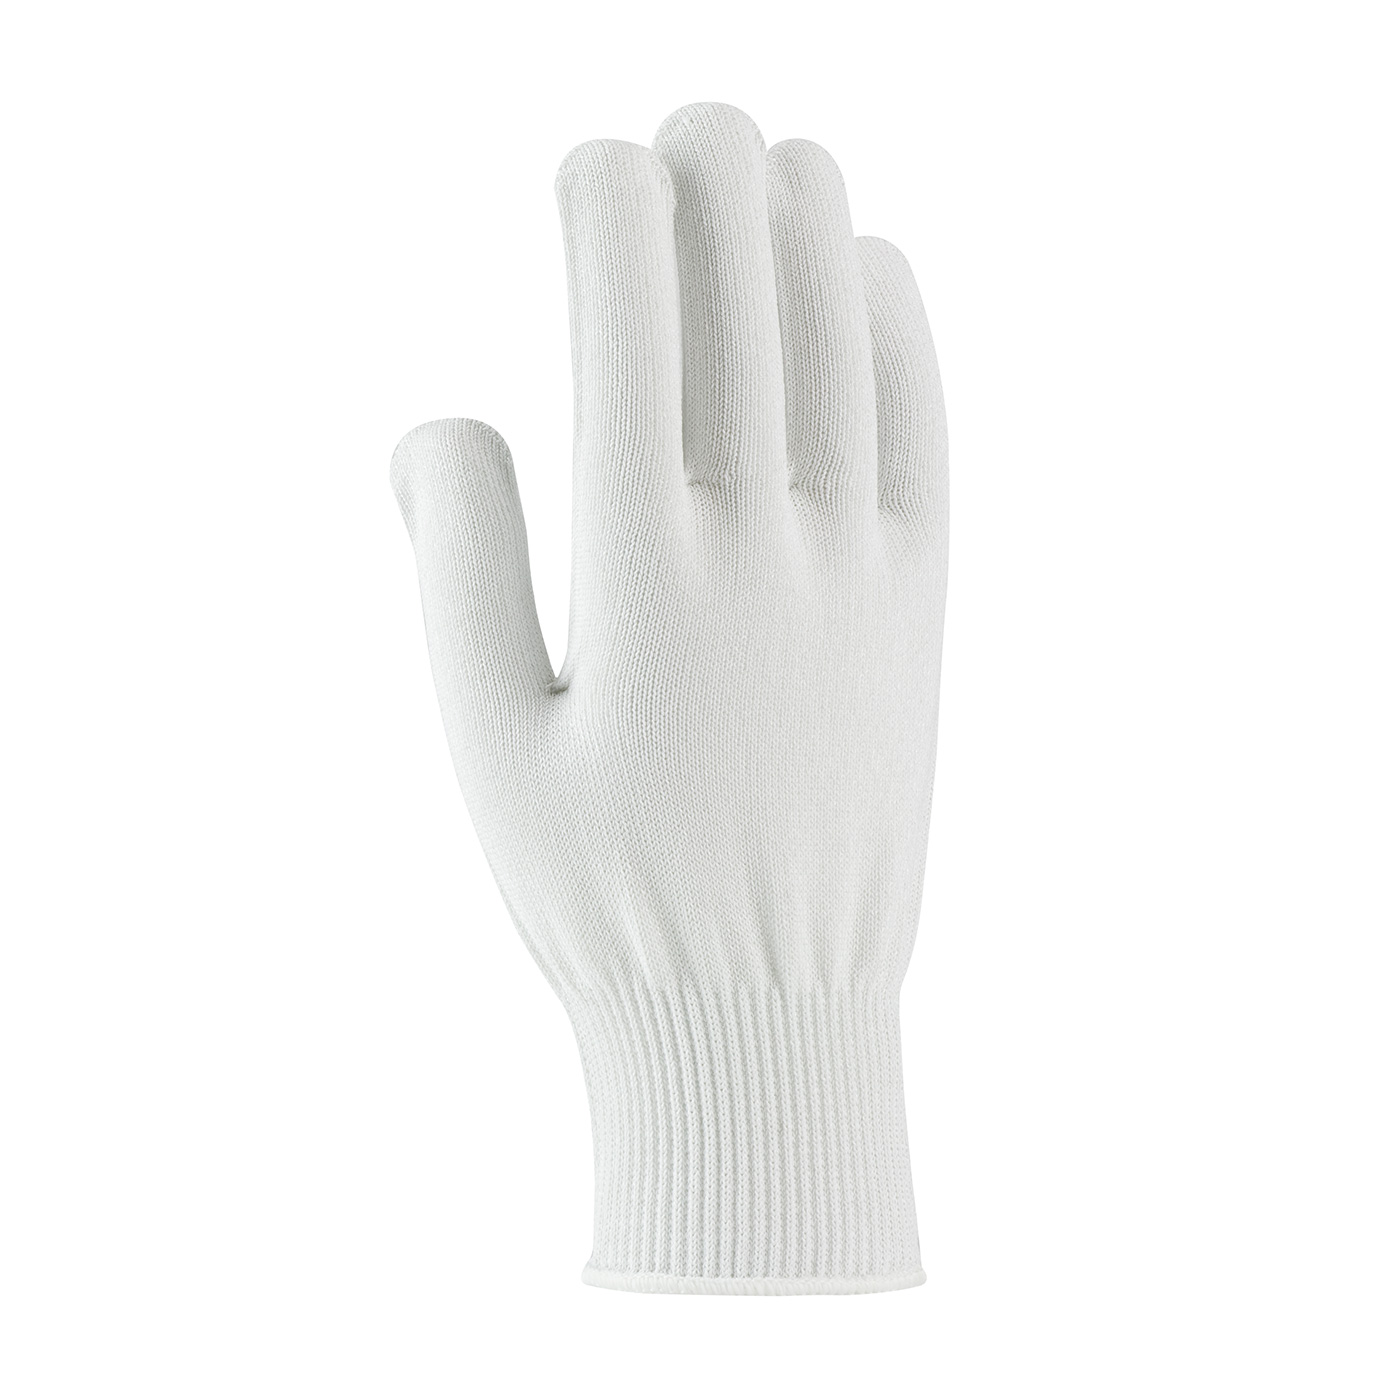 22-750 PIP® white Claw Cover® Seamless Knit Dyneema® Blended Antimicrobial Glove - Light Weight